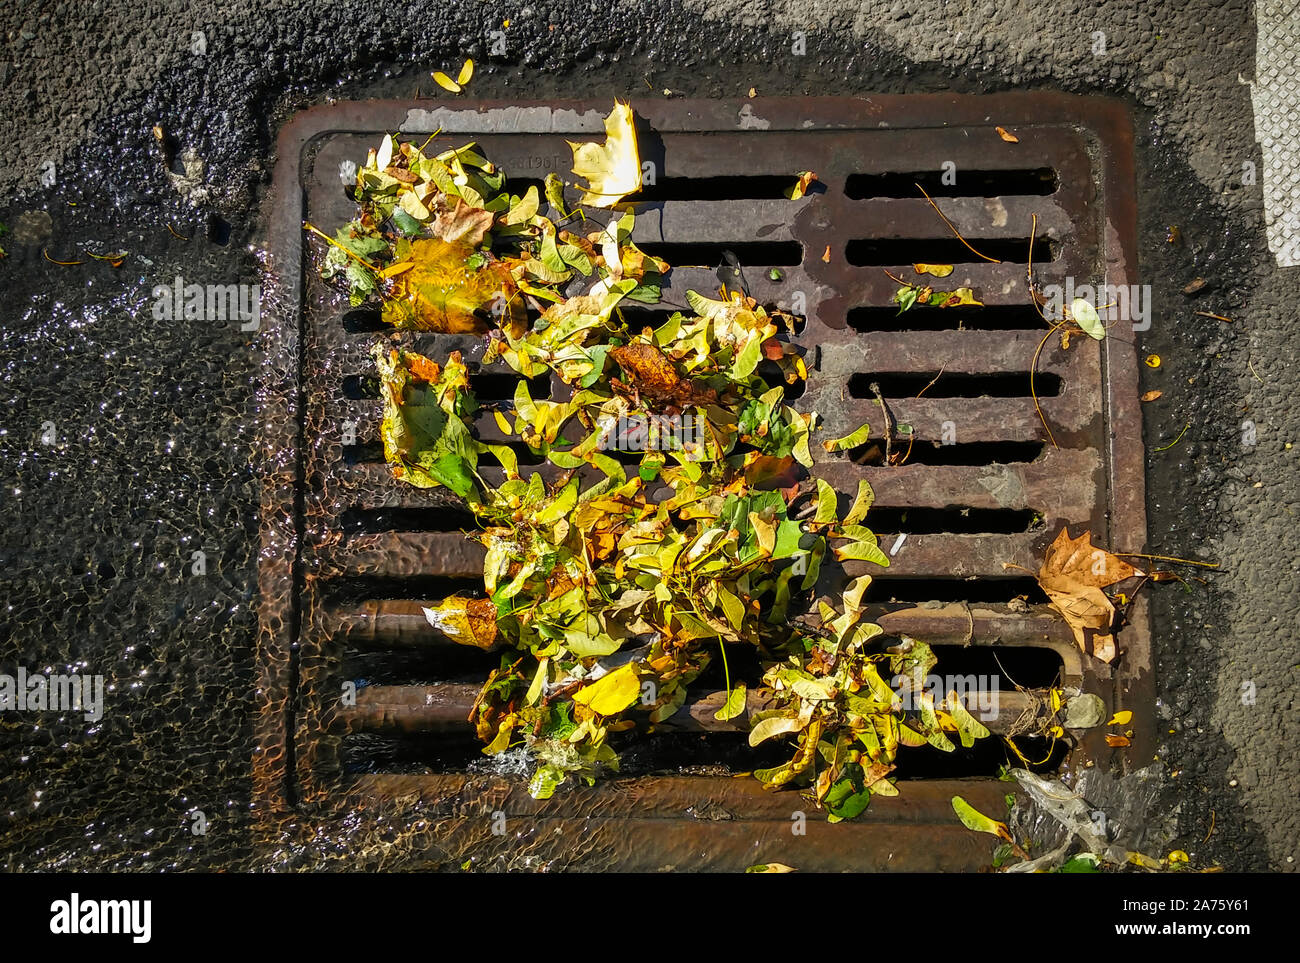 A partially clogged storm drain, filled with the remains of colorful fall foliage, in the Chelsea neighborhood of New York on Friday, October 18, 2019.  (© Richard b. Levine) Stock Photo